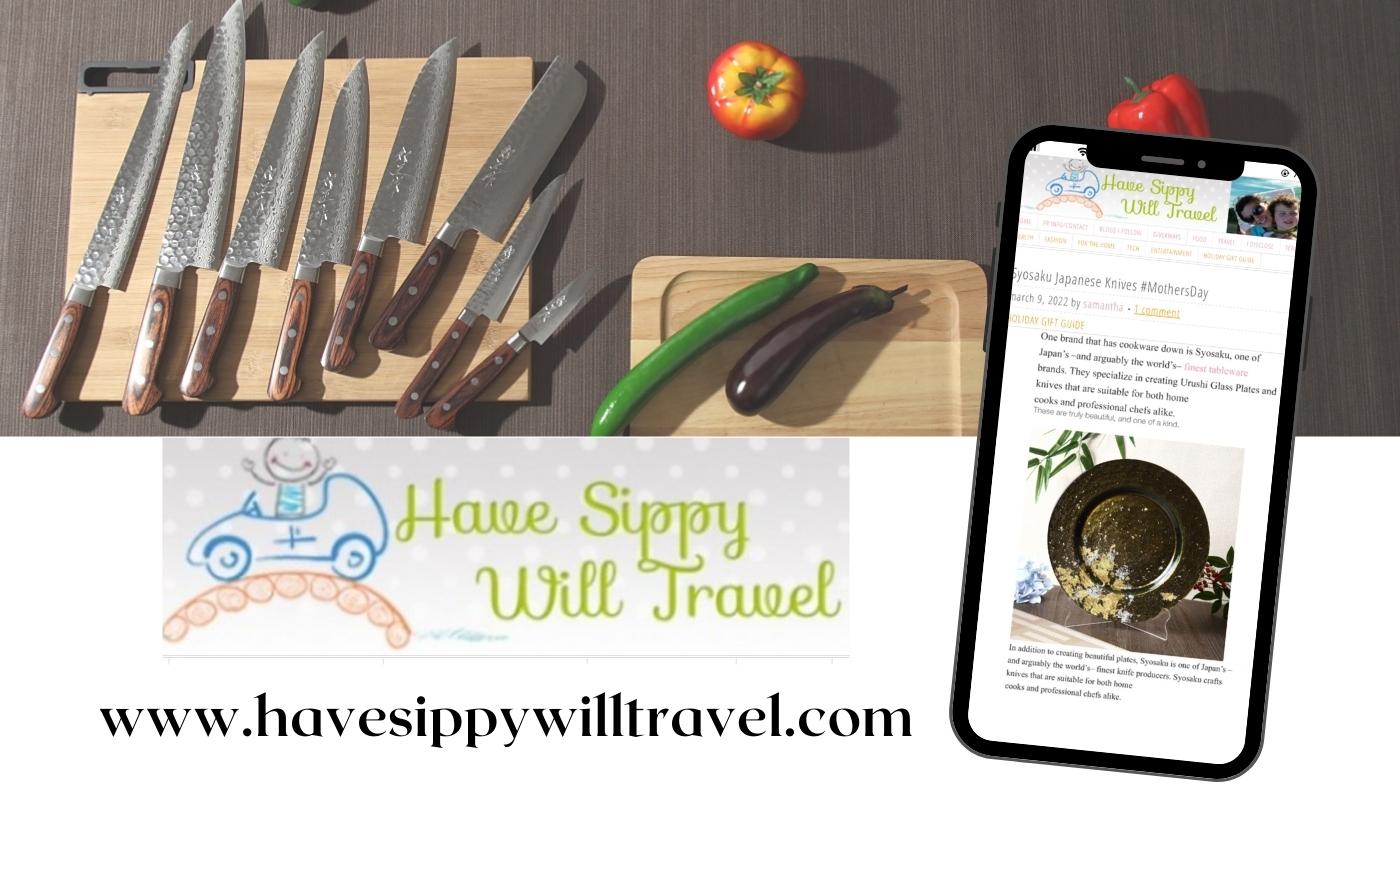 Syosaku-Japan was Featured in Have Sippy Will Travel